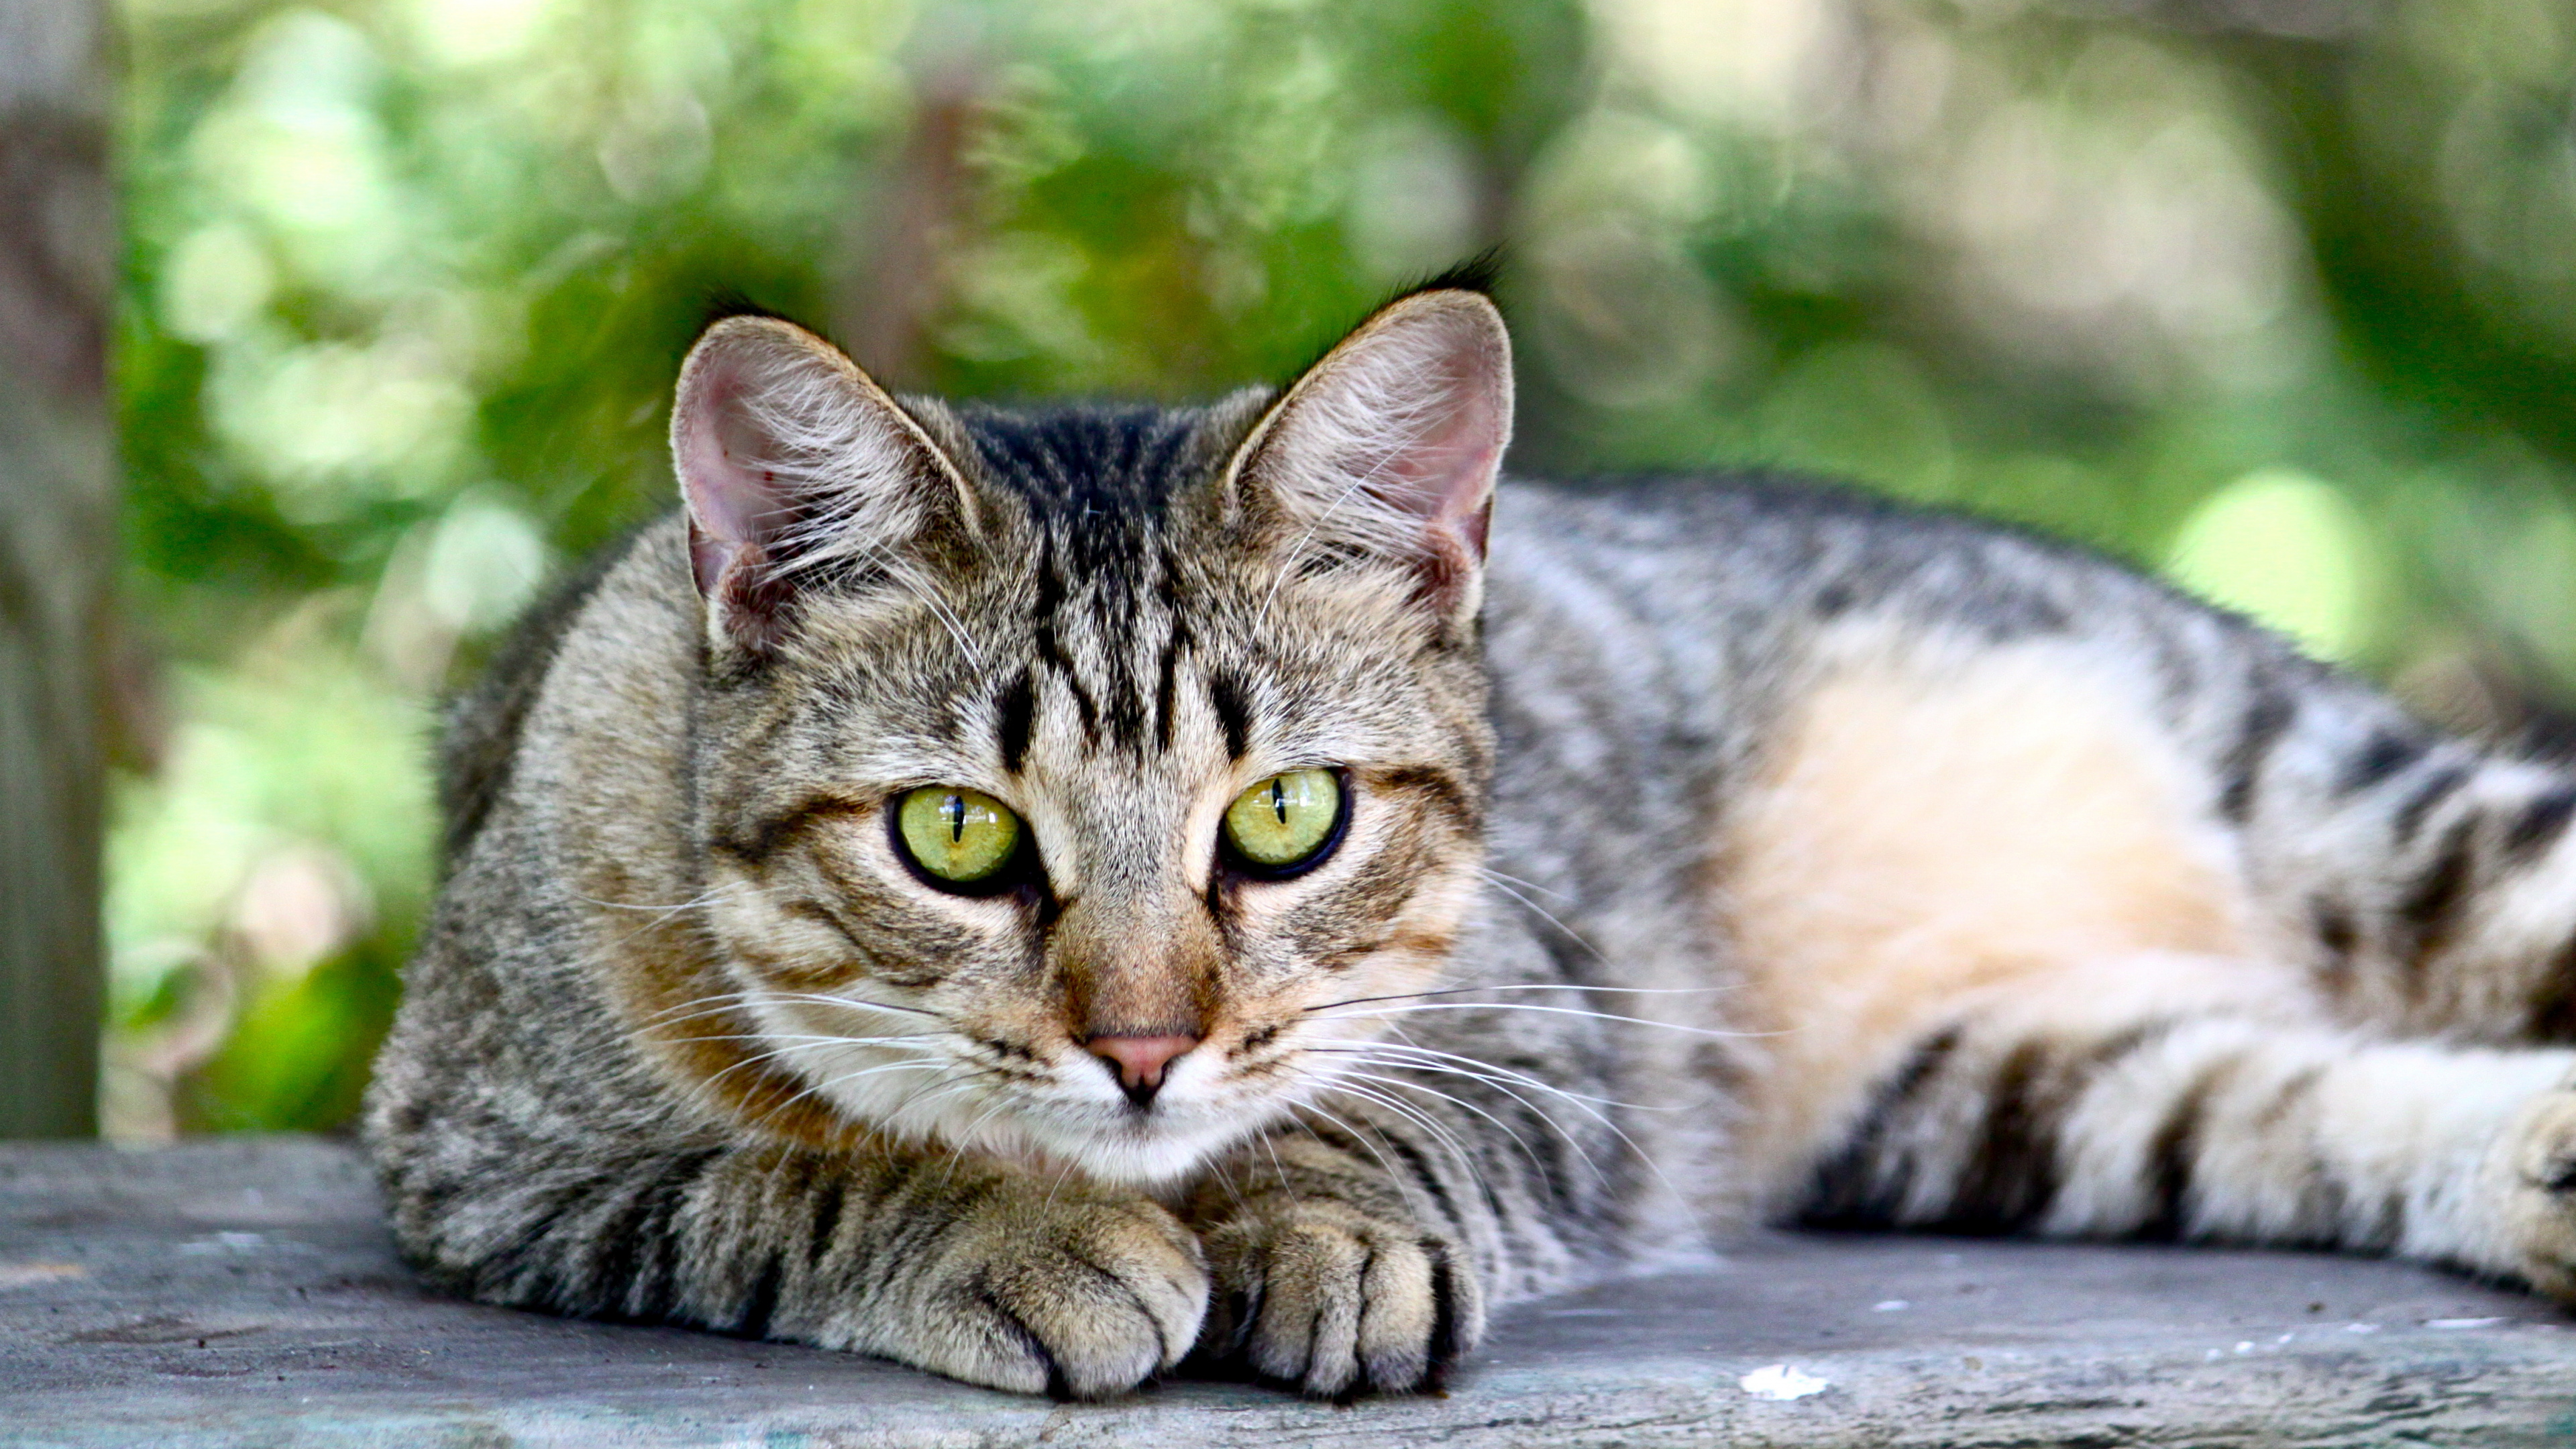 Brown Tabby Cat Lying on Wooden Surface. Wallpaper in 3840x2160 Resolution